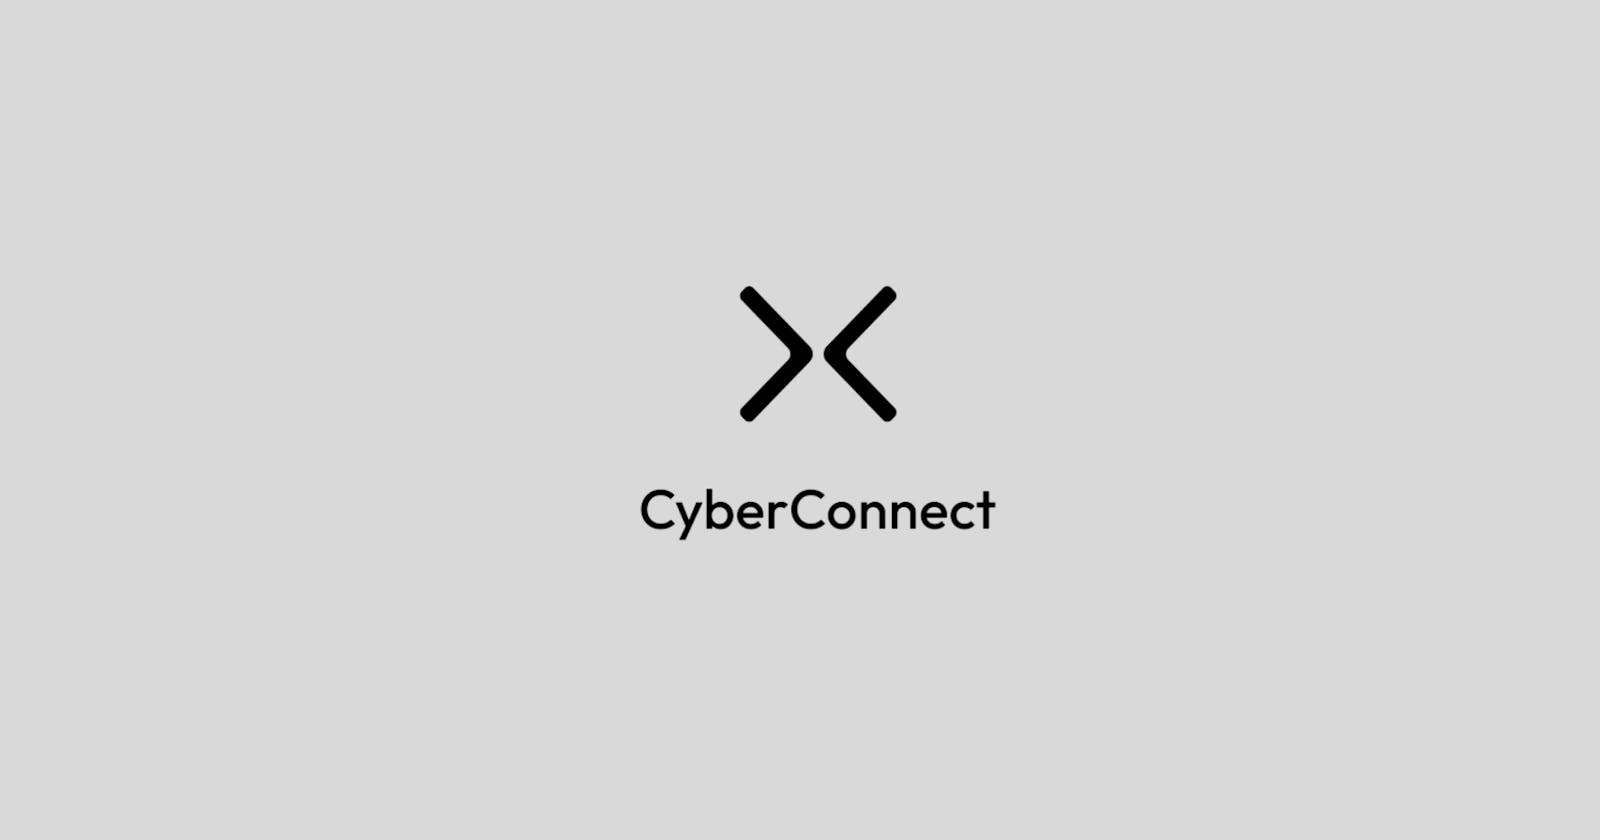 Overview of CyberConnect on-chain protocol and explore the potential use cases.